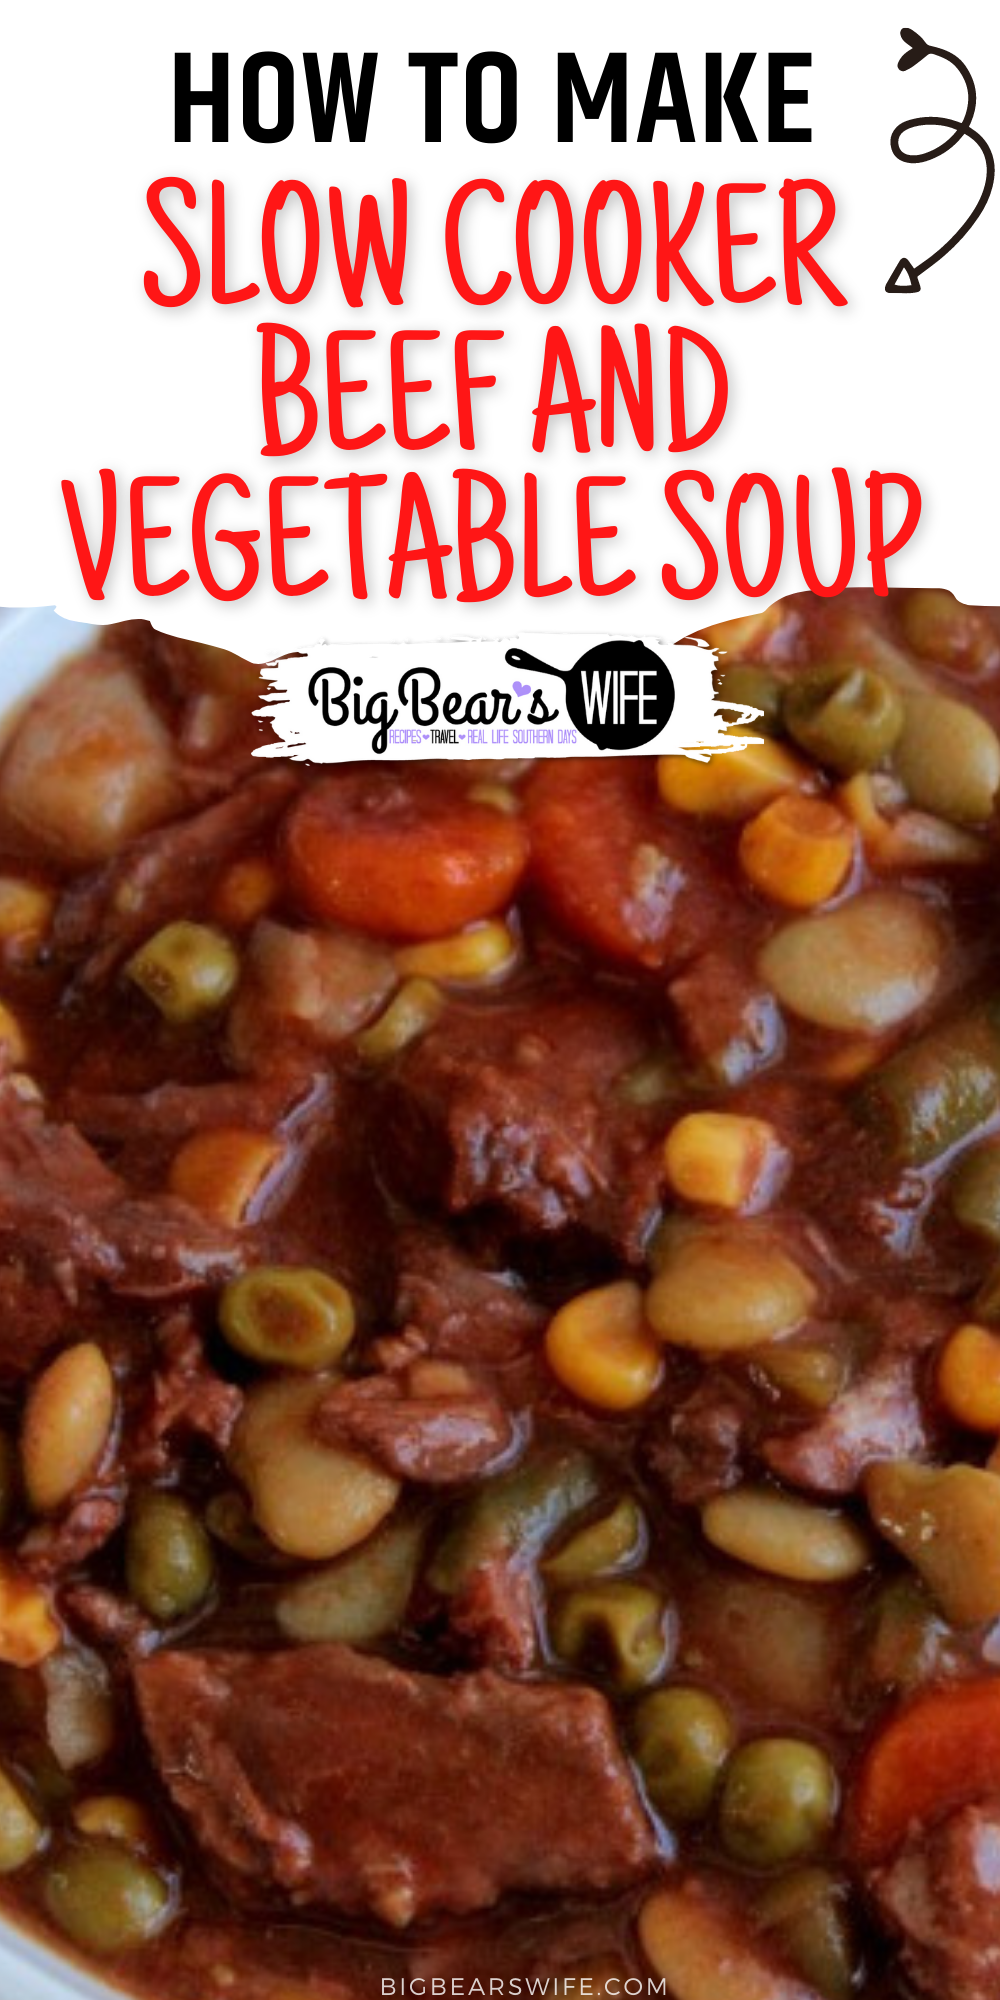 A Slow Cooker Beef and Vegetable Soup that is inspired by my grandmother's vegetable soup! We love this and make it all the time!  via @bigbearswife